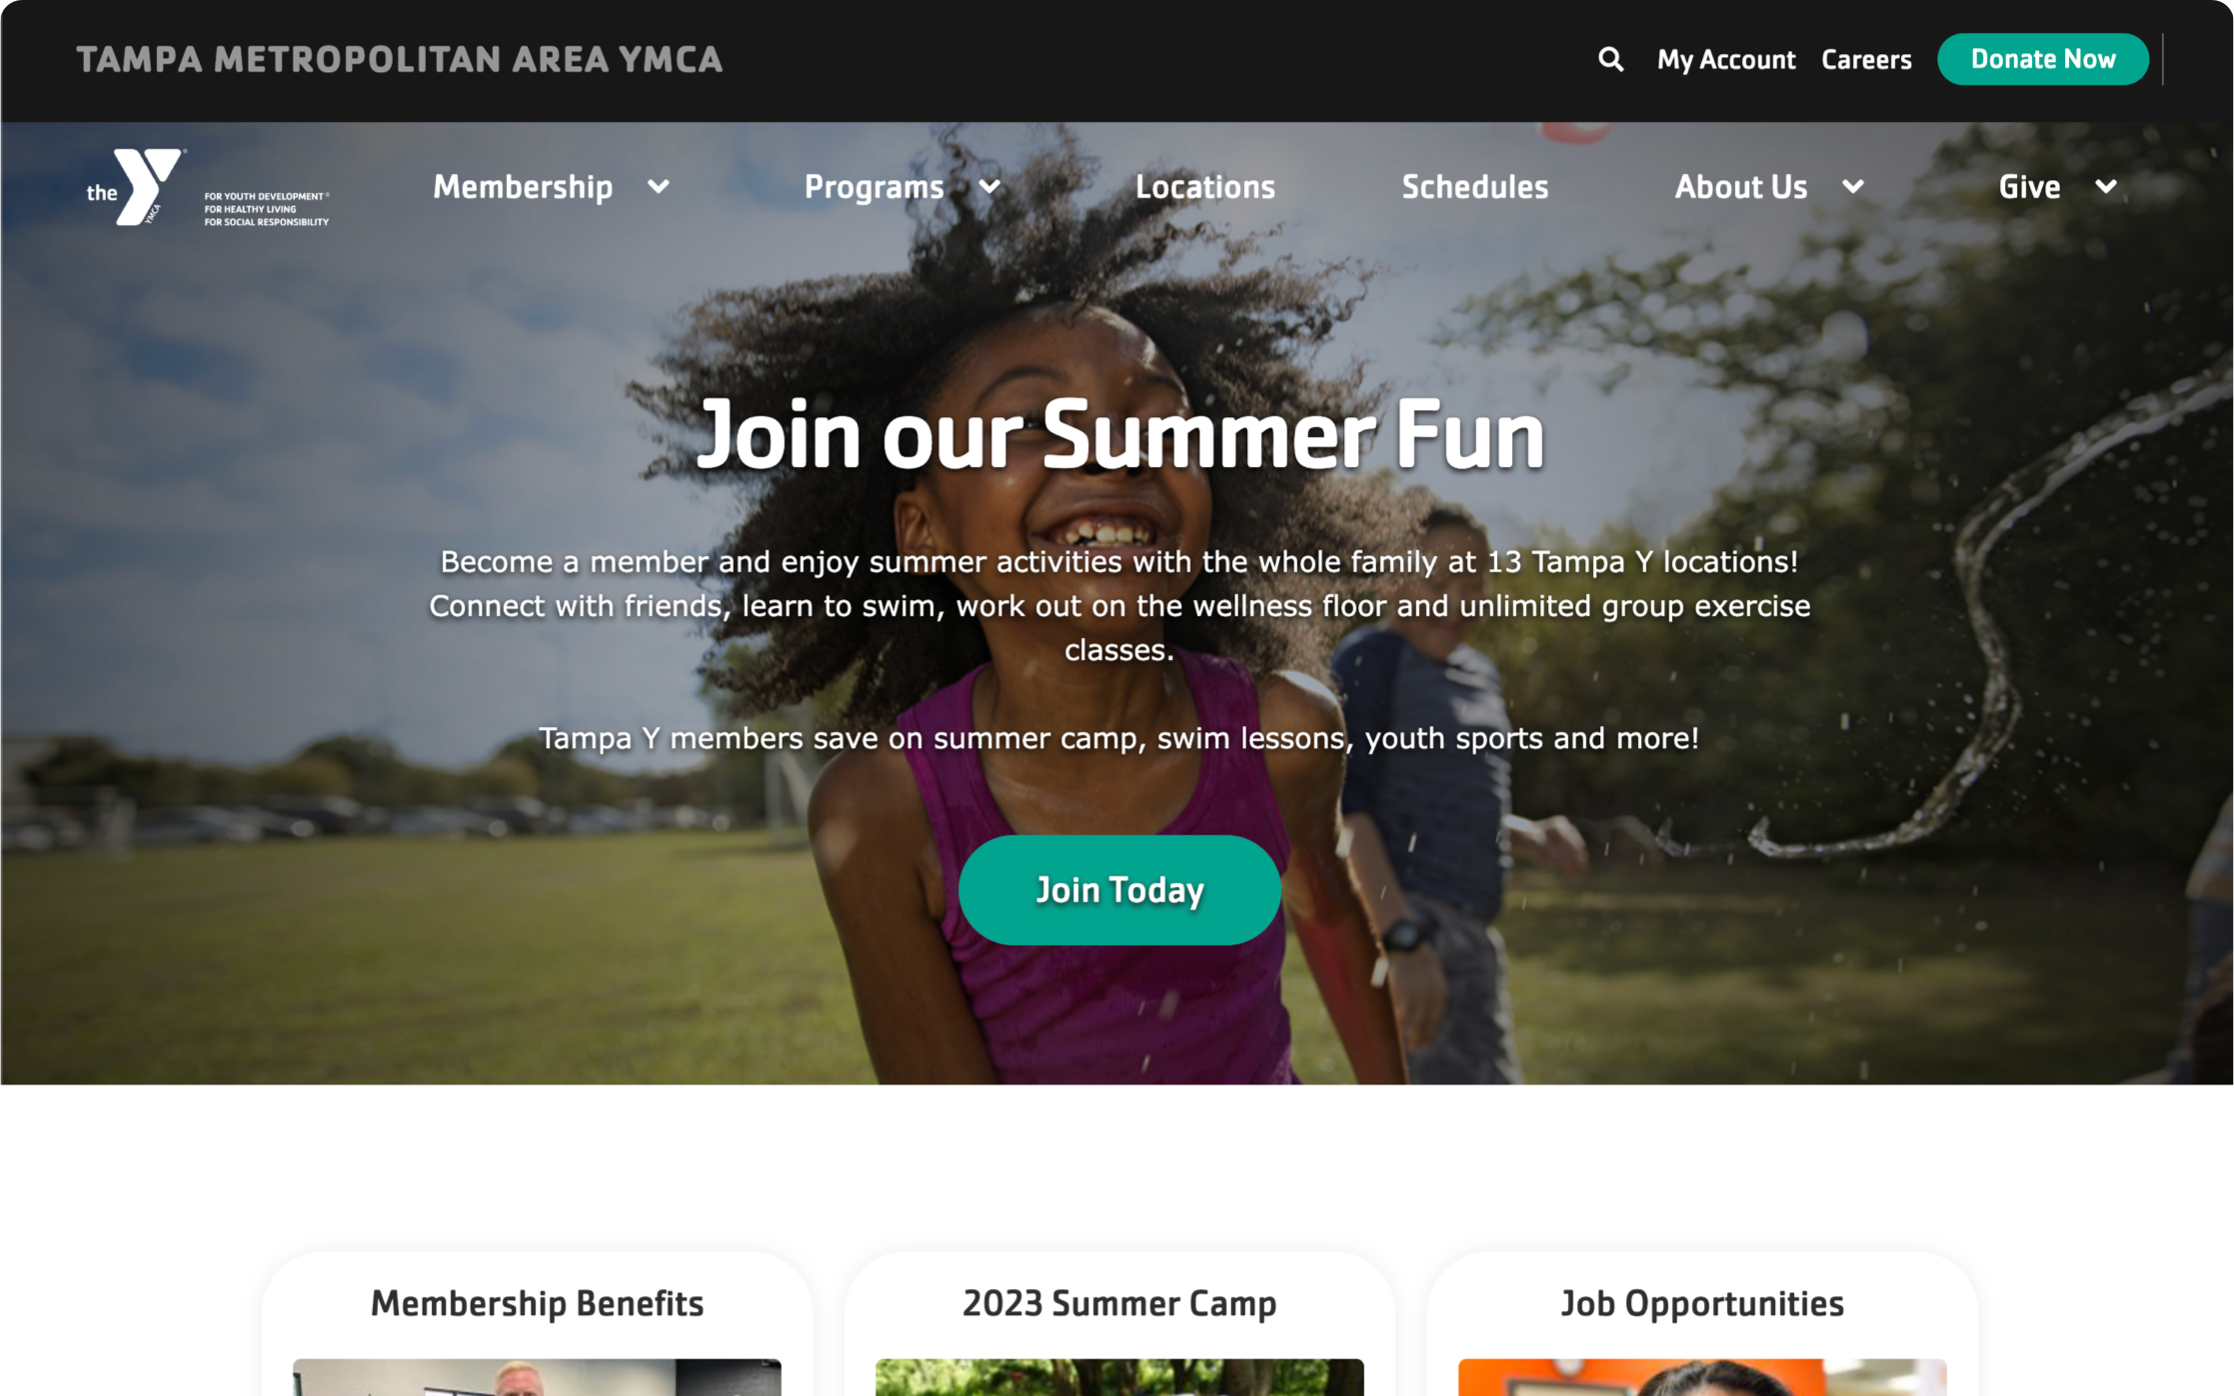 Through the ActiveNet integration, we were able to improve the client purchasing experience, allowing users to register online without having to come into or phone into the branch. As a result, since launch, the YMCA has doubled their online sales.